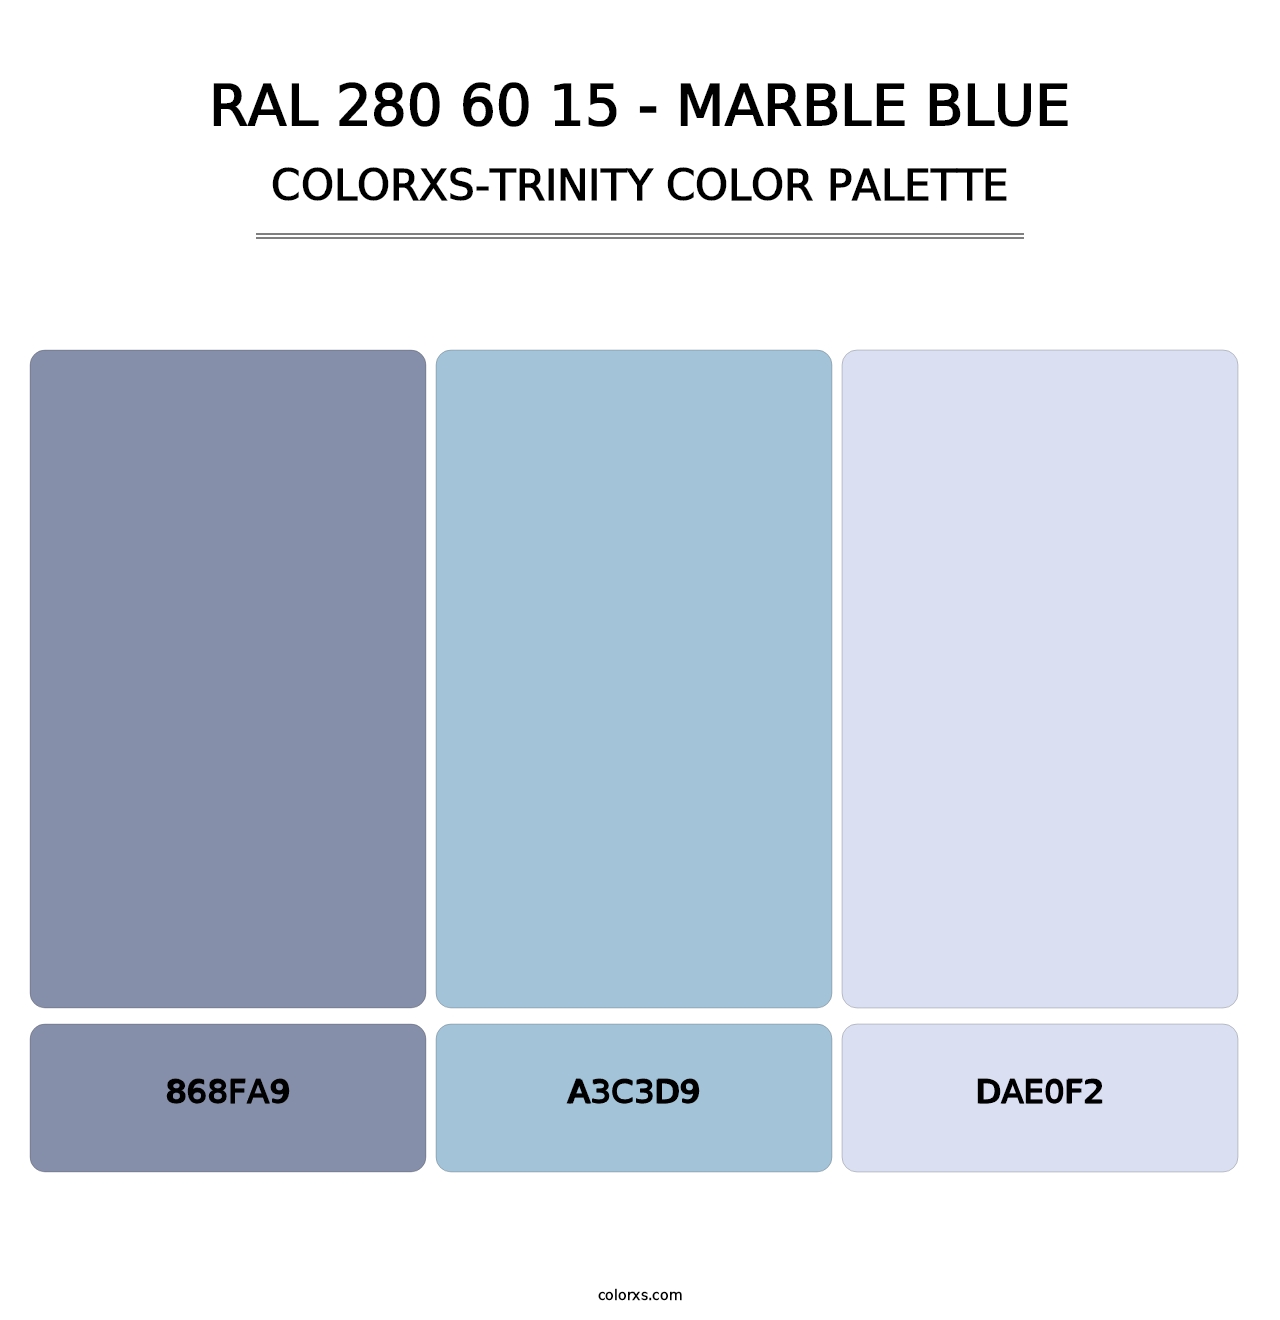 RAL 280 60 15 - Marble Blue - Colorxs Trinity Palette